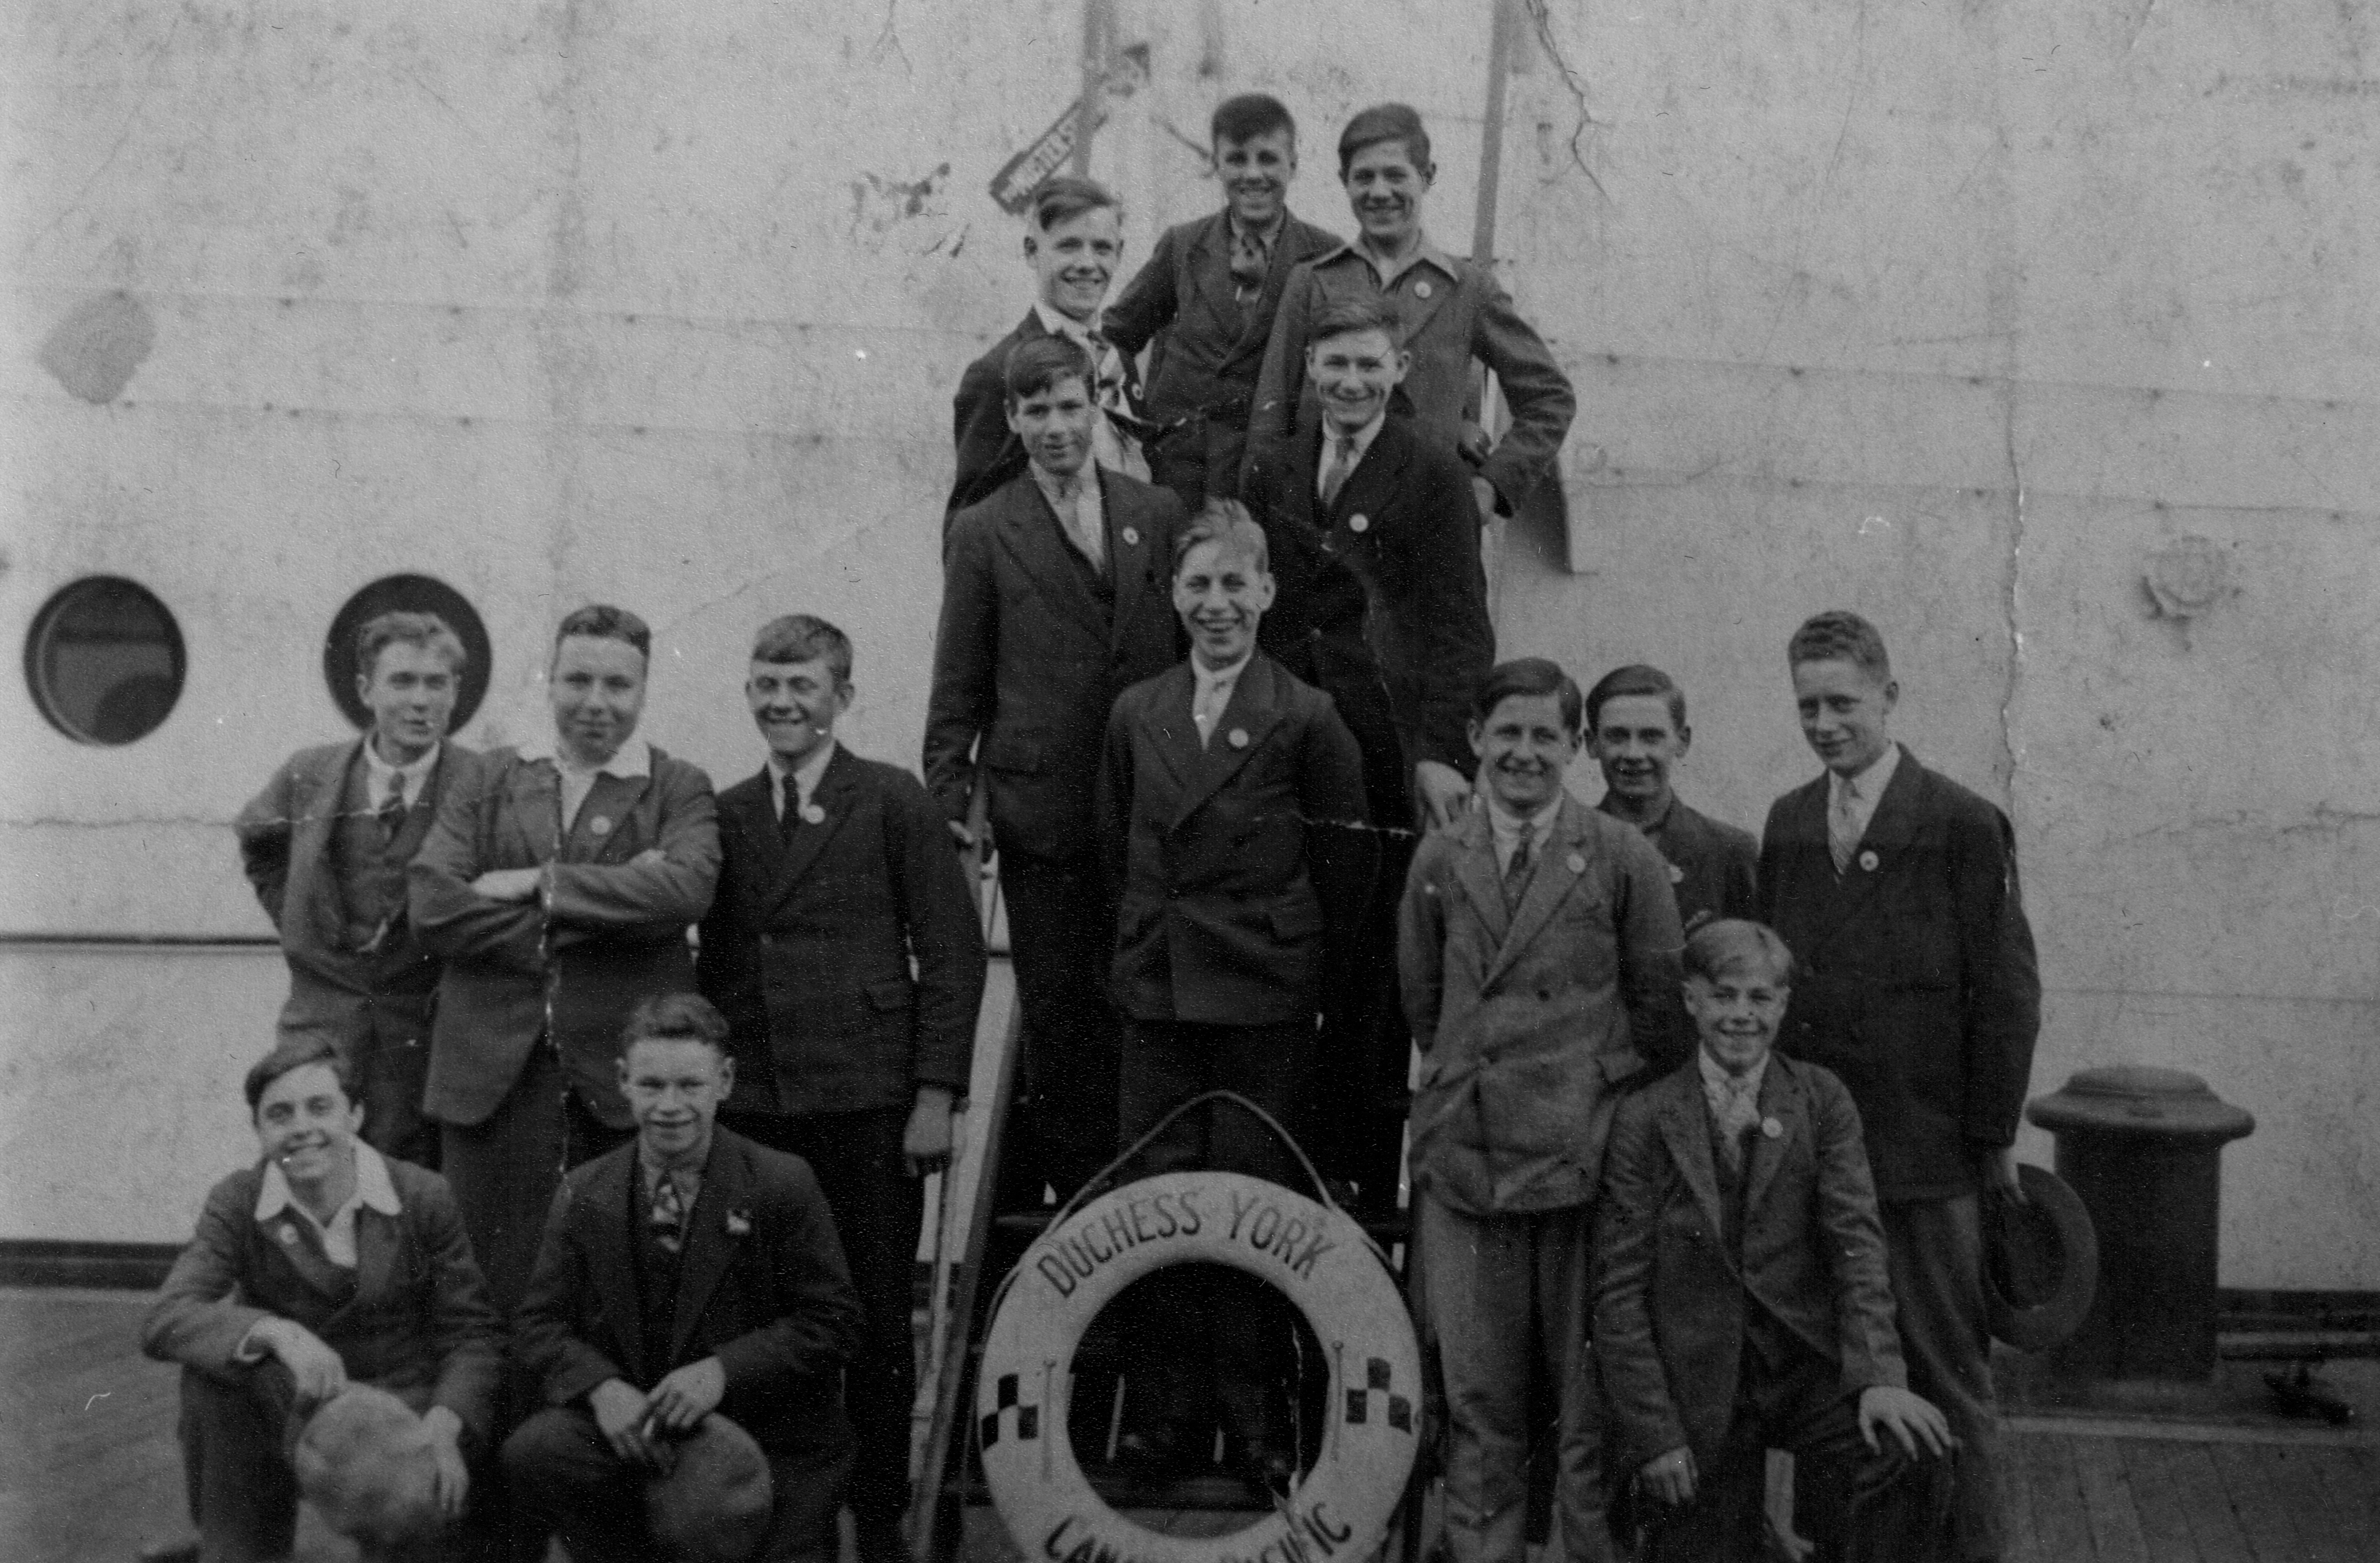 Searching Canadian passenger lists from 1921-1931 many third-class boys are listed in care of BICA